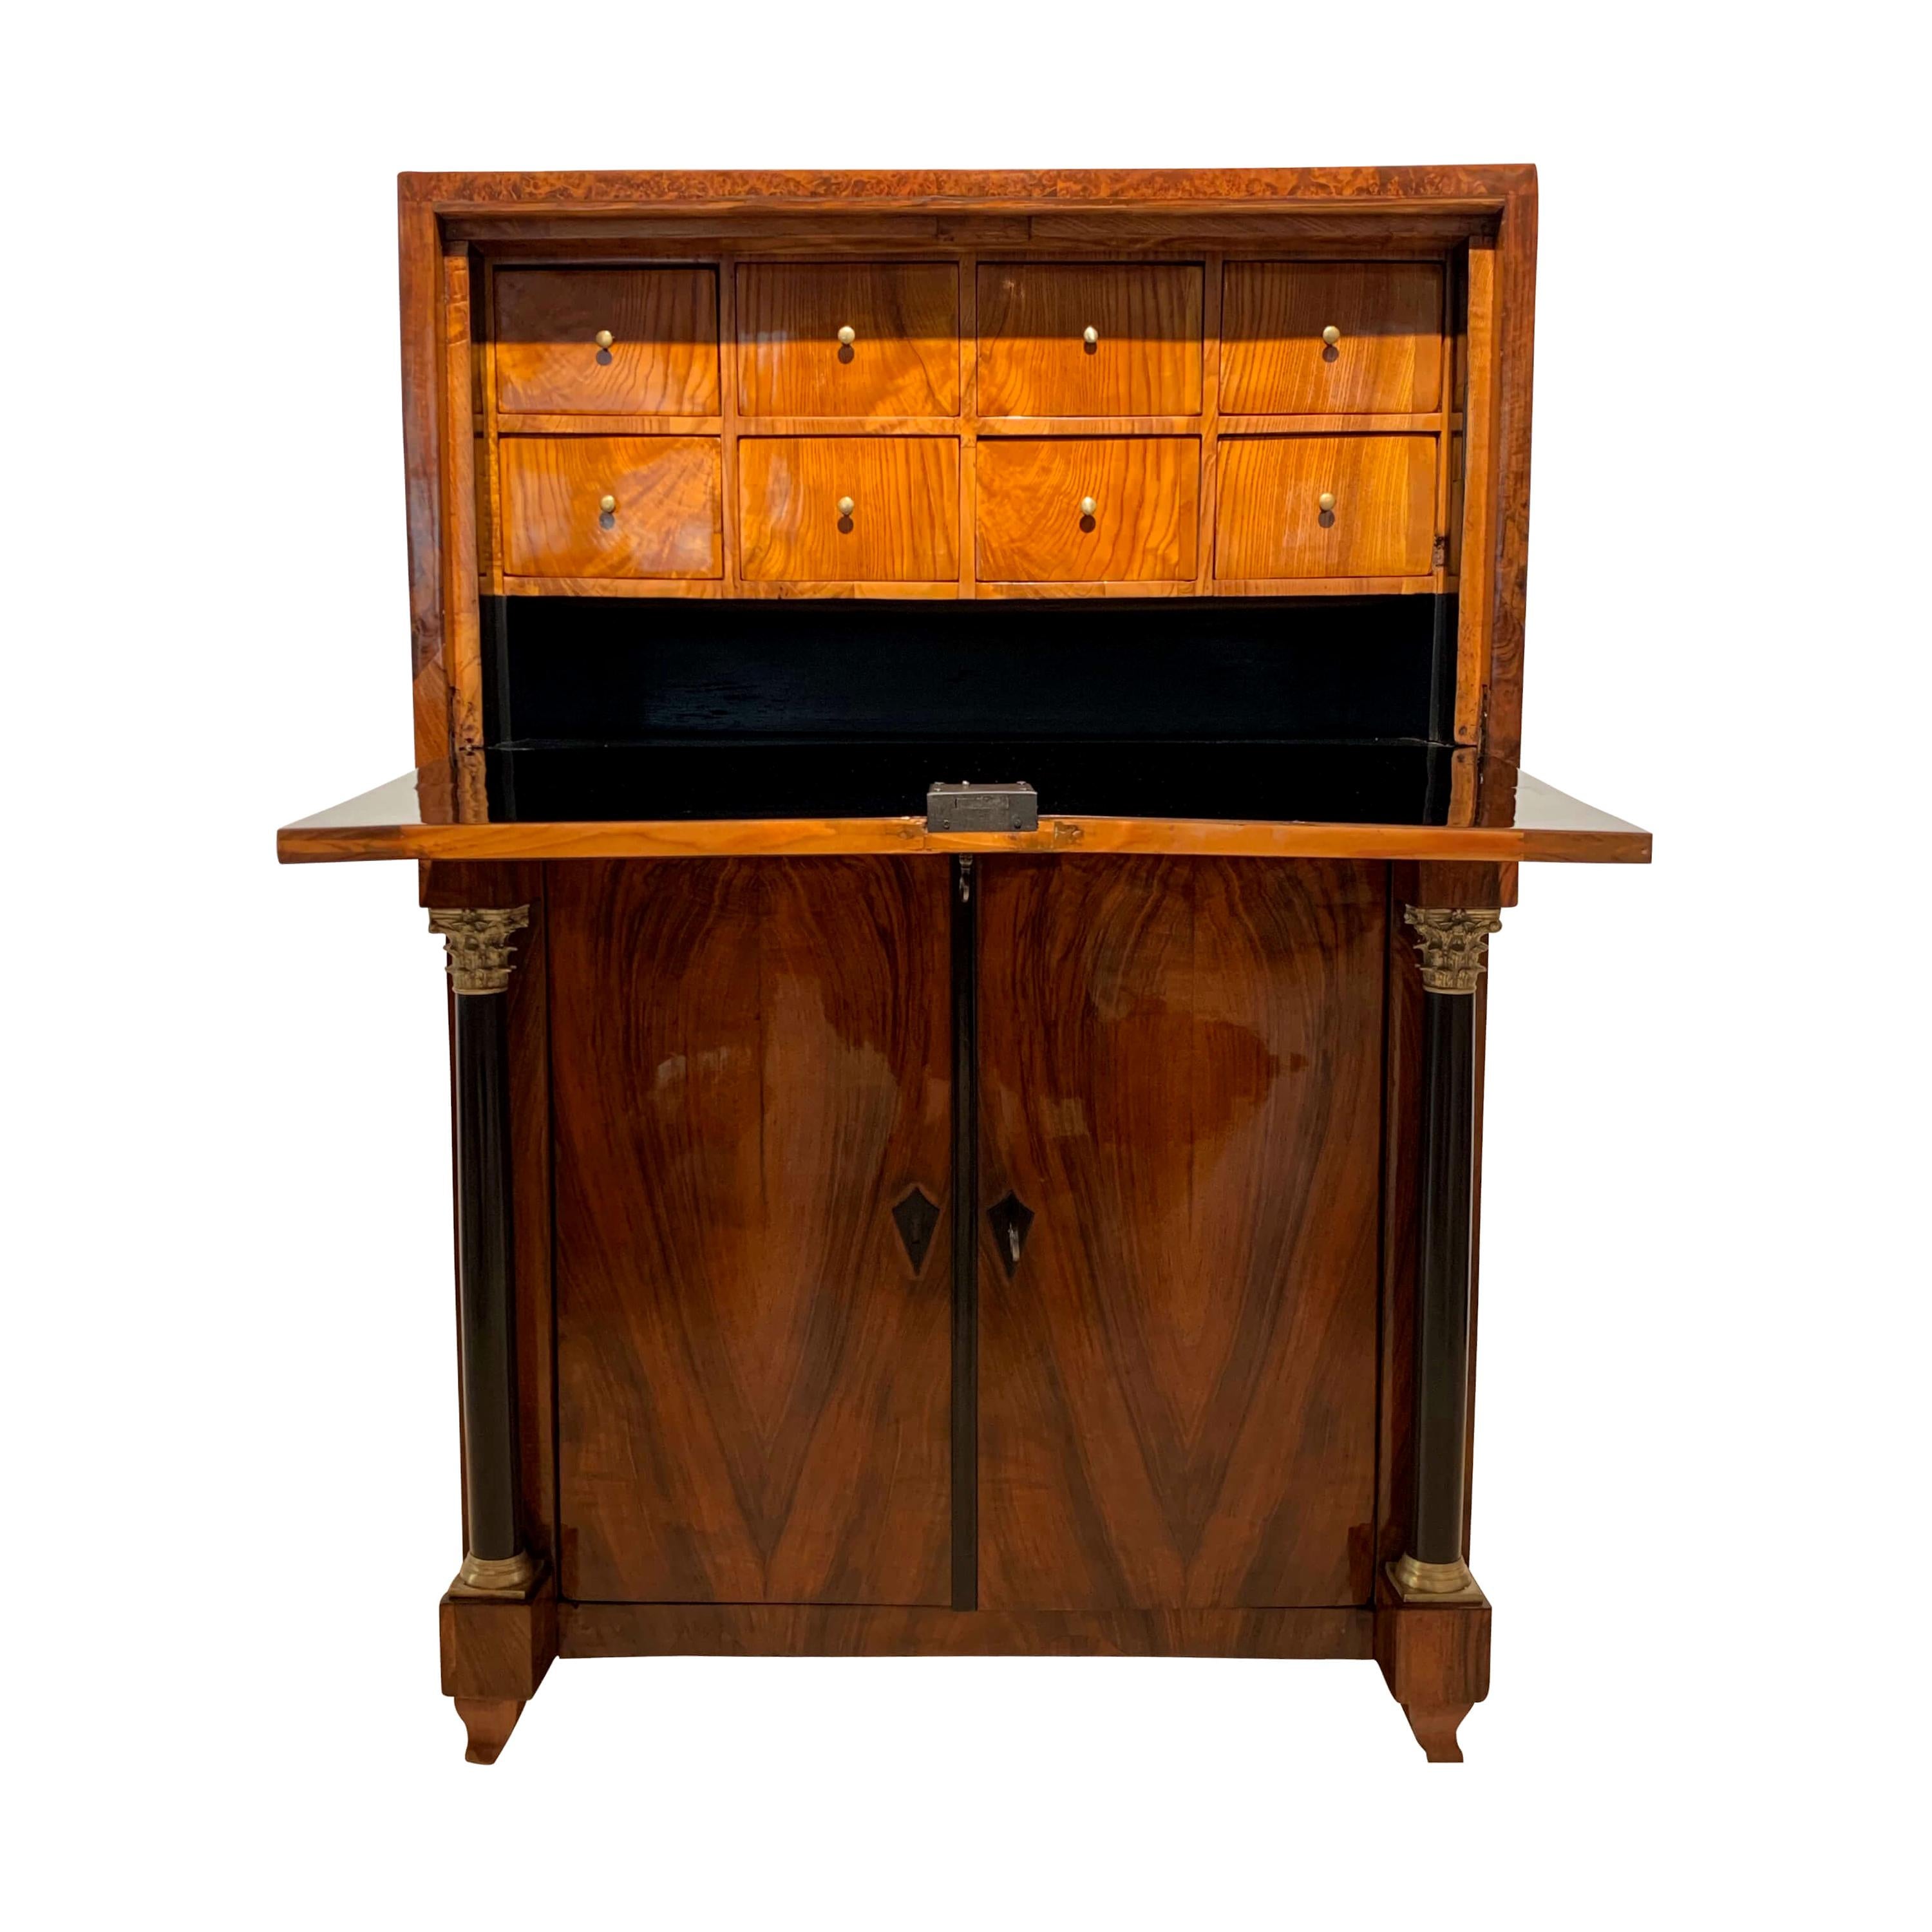 Extraordinary small Biedermeier Secretaire / writing desk from Austria, Vienna, 1820s.

Wonderful book-matched walnut veneer on the outside and walnut roots veneer at the cornice rims.
Inside with eight long drawers, veneered in Ash with brass